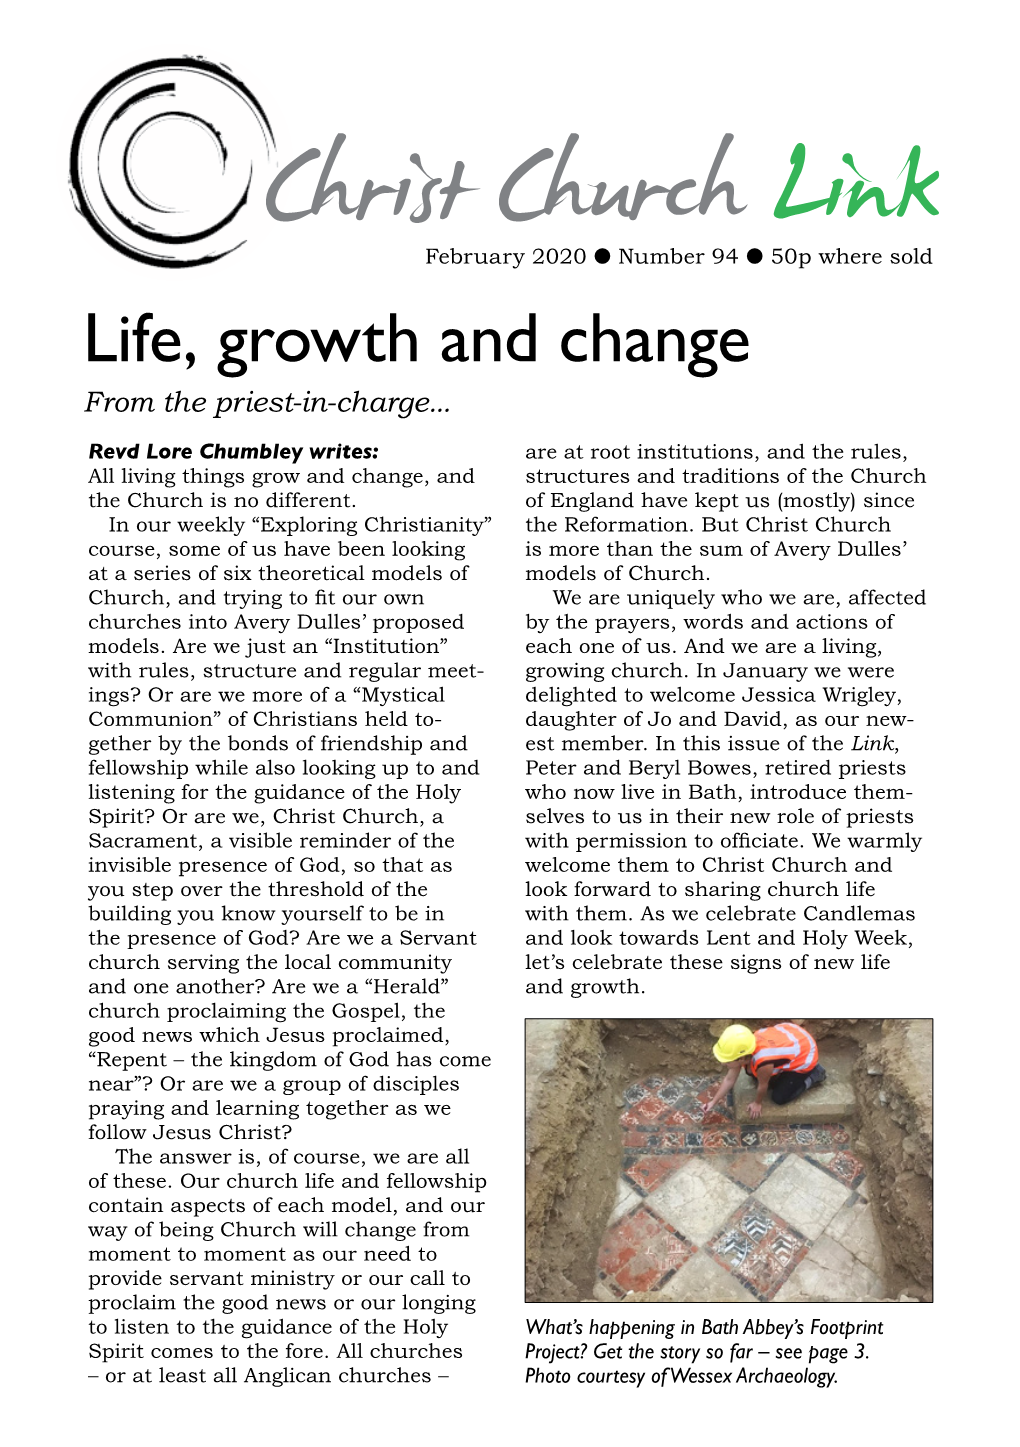 Life, Growth and Change from the Priest-In-Charge